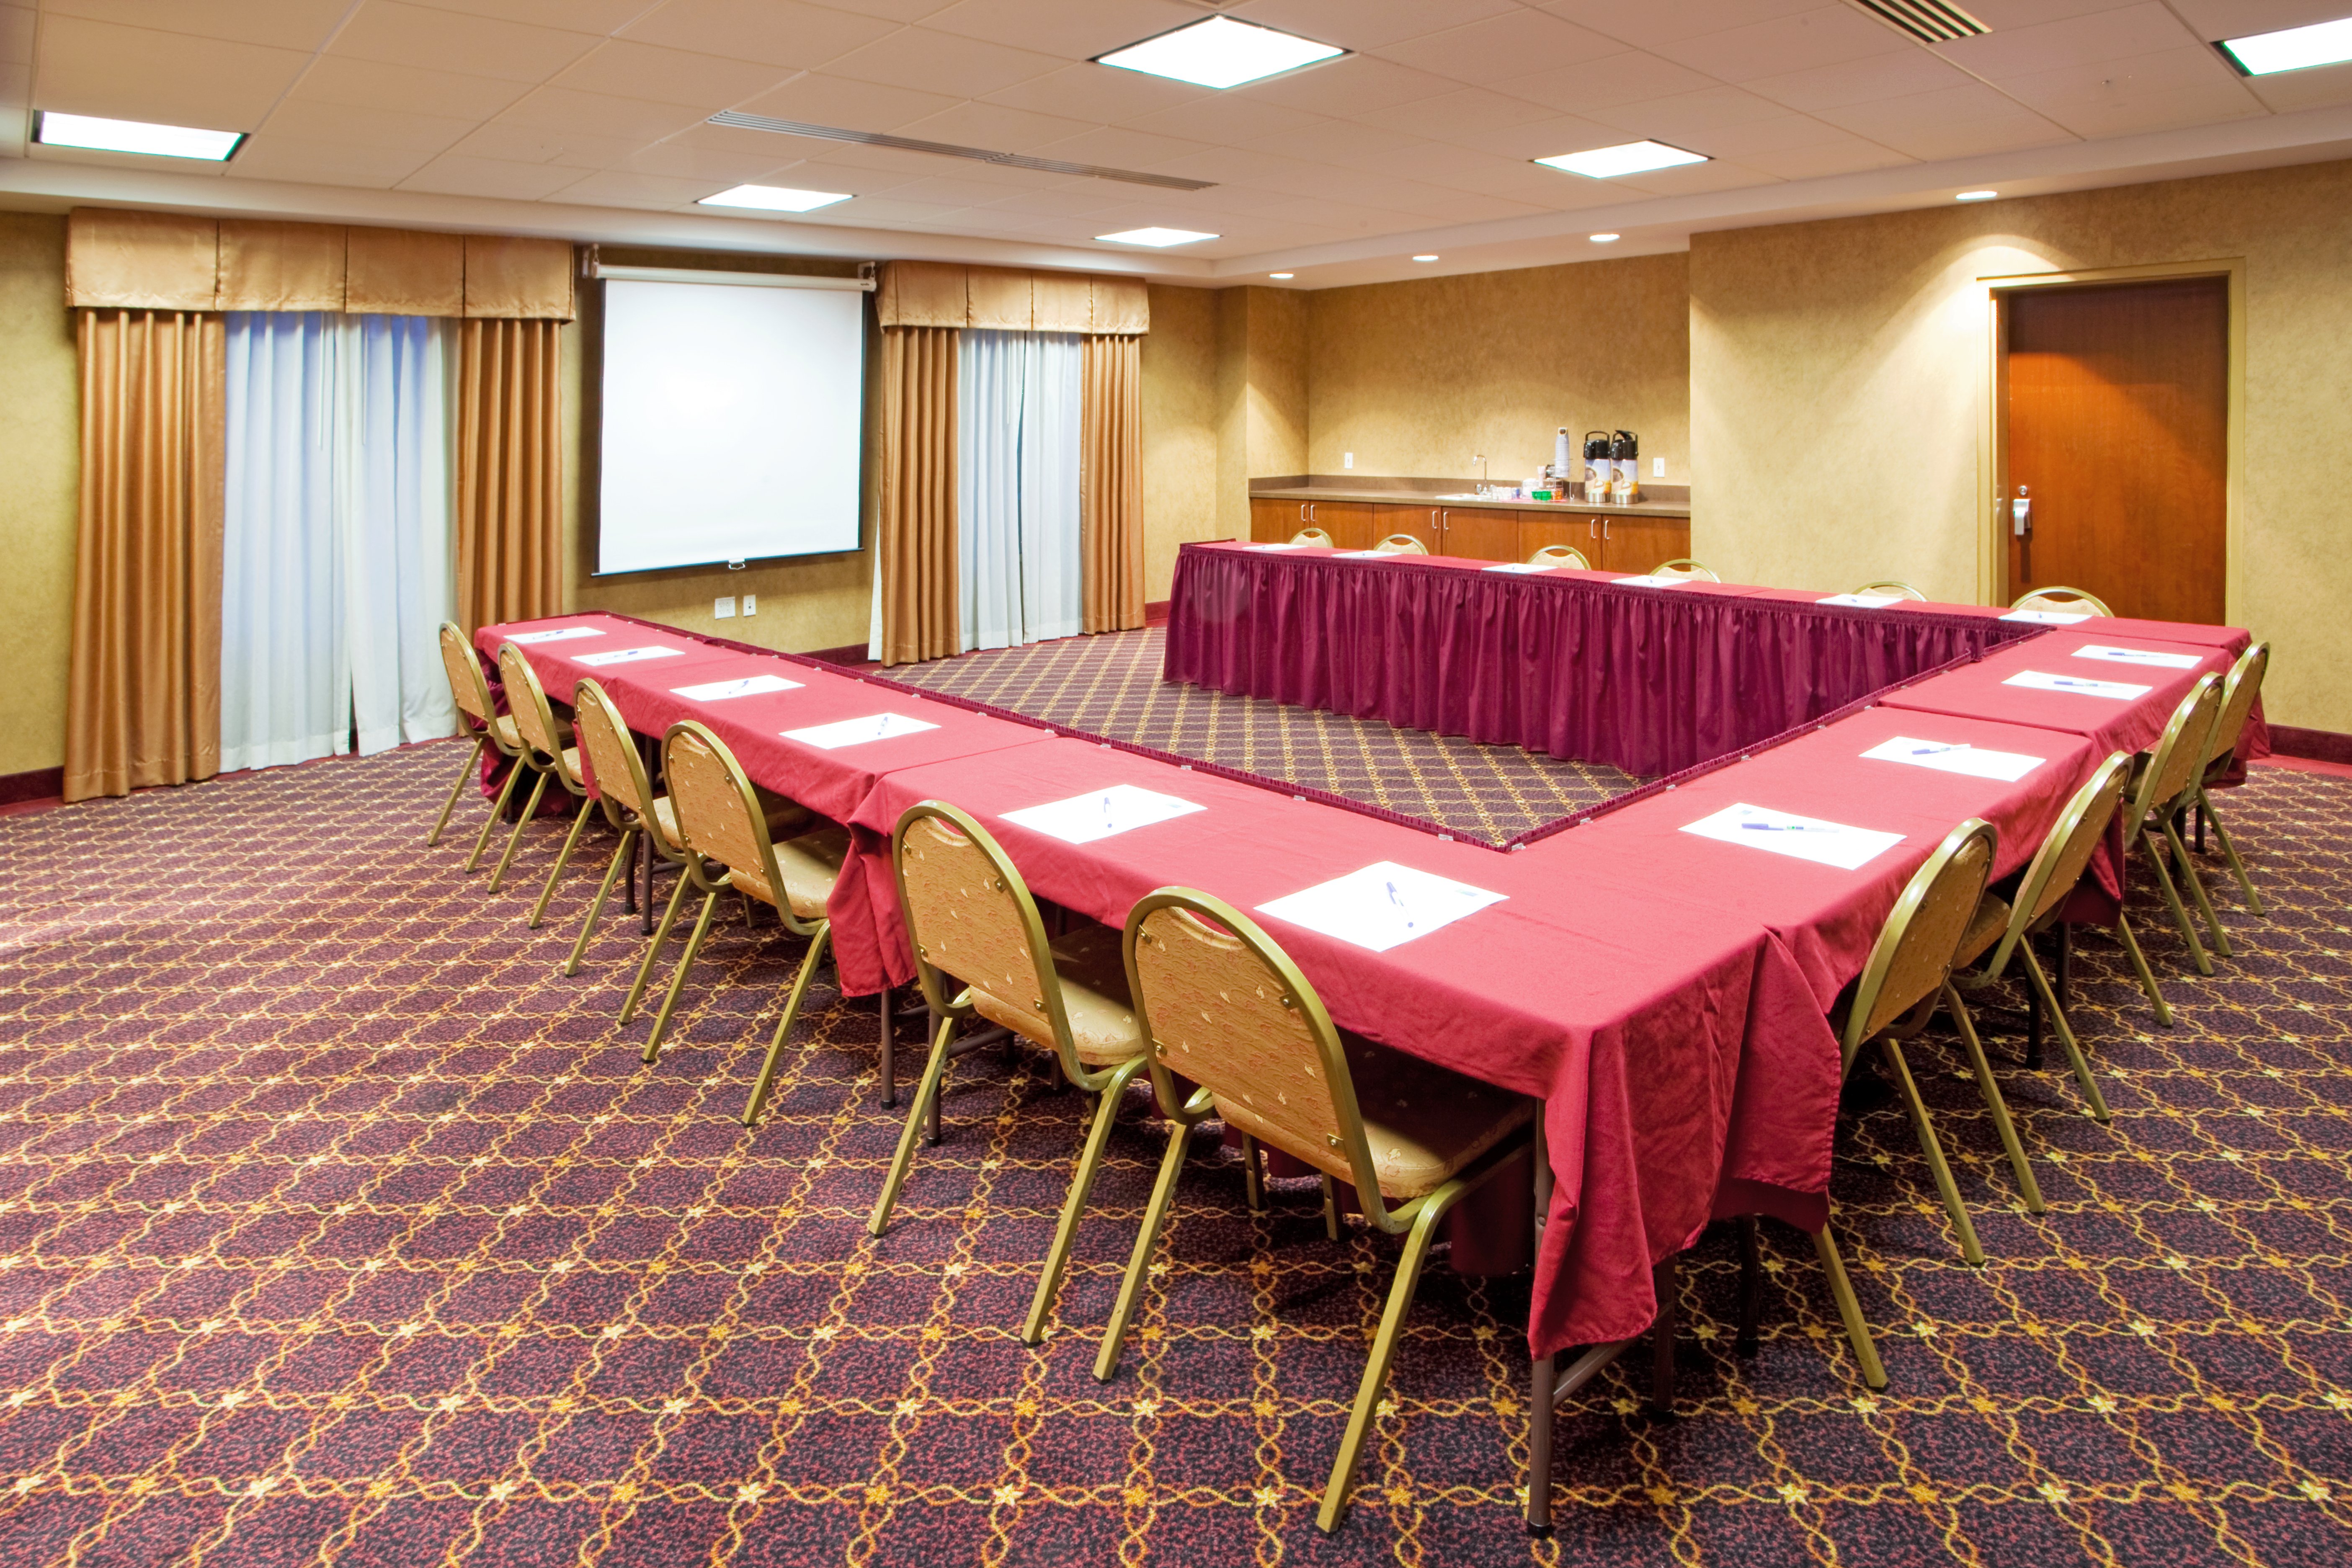 Meeting Room Holds up to 40 people 737 sq. feet. Quiet and Comfort